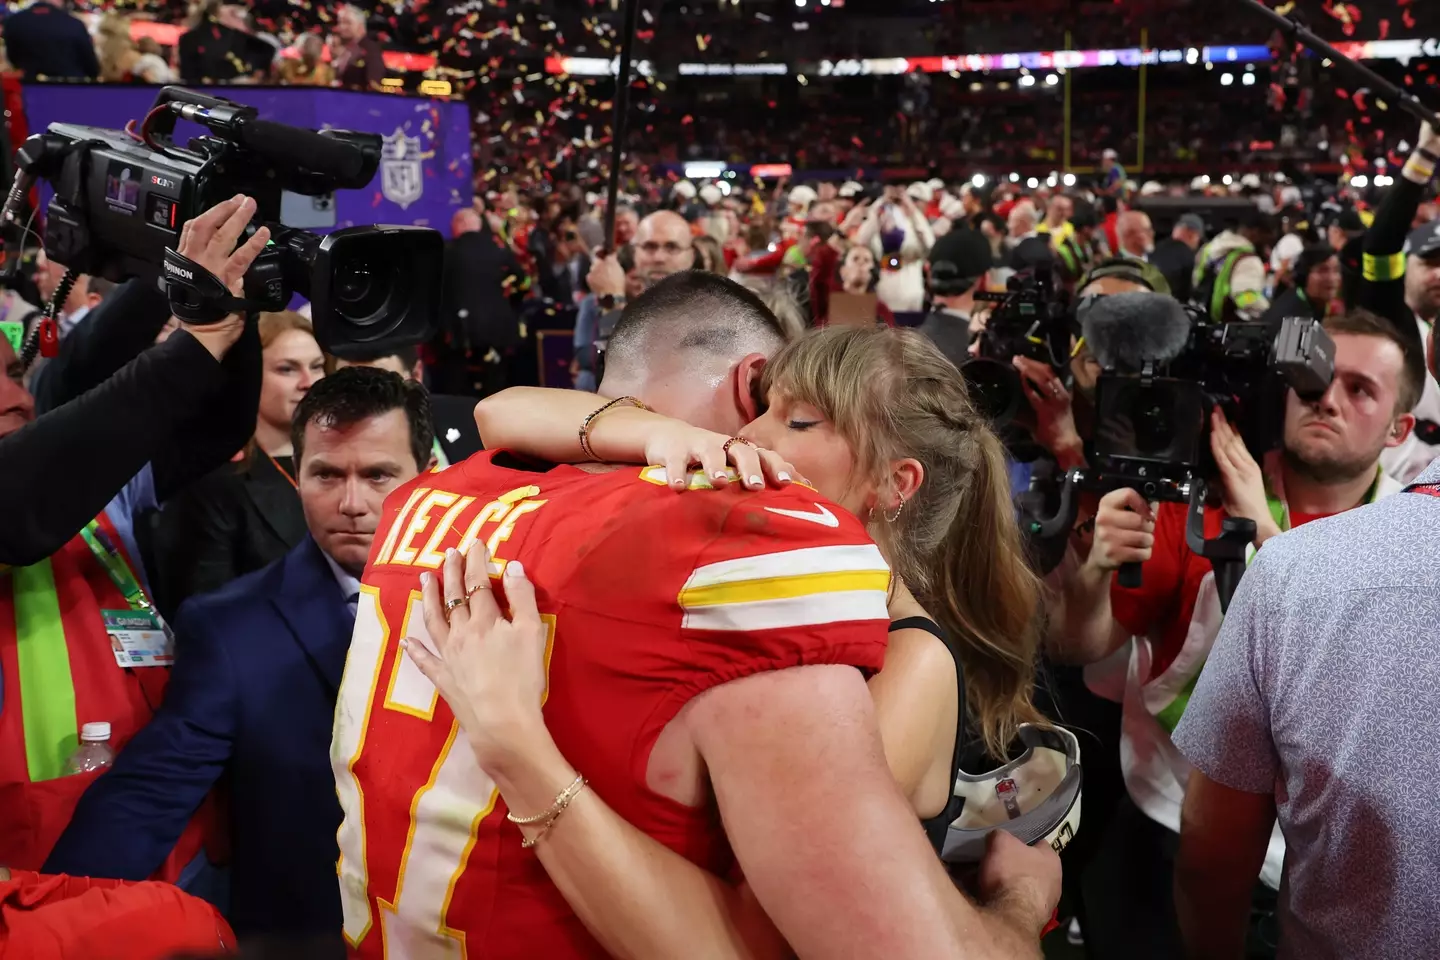 The couple shared a heartfelt hug following the end of the game.